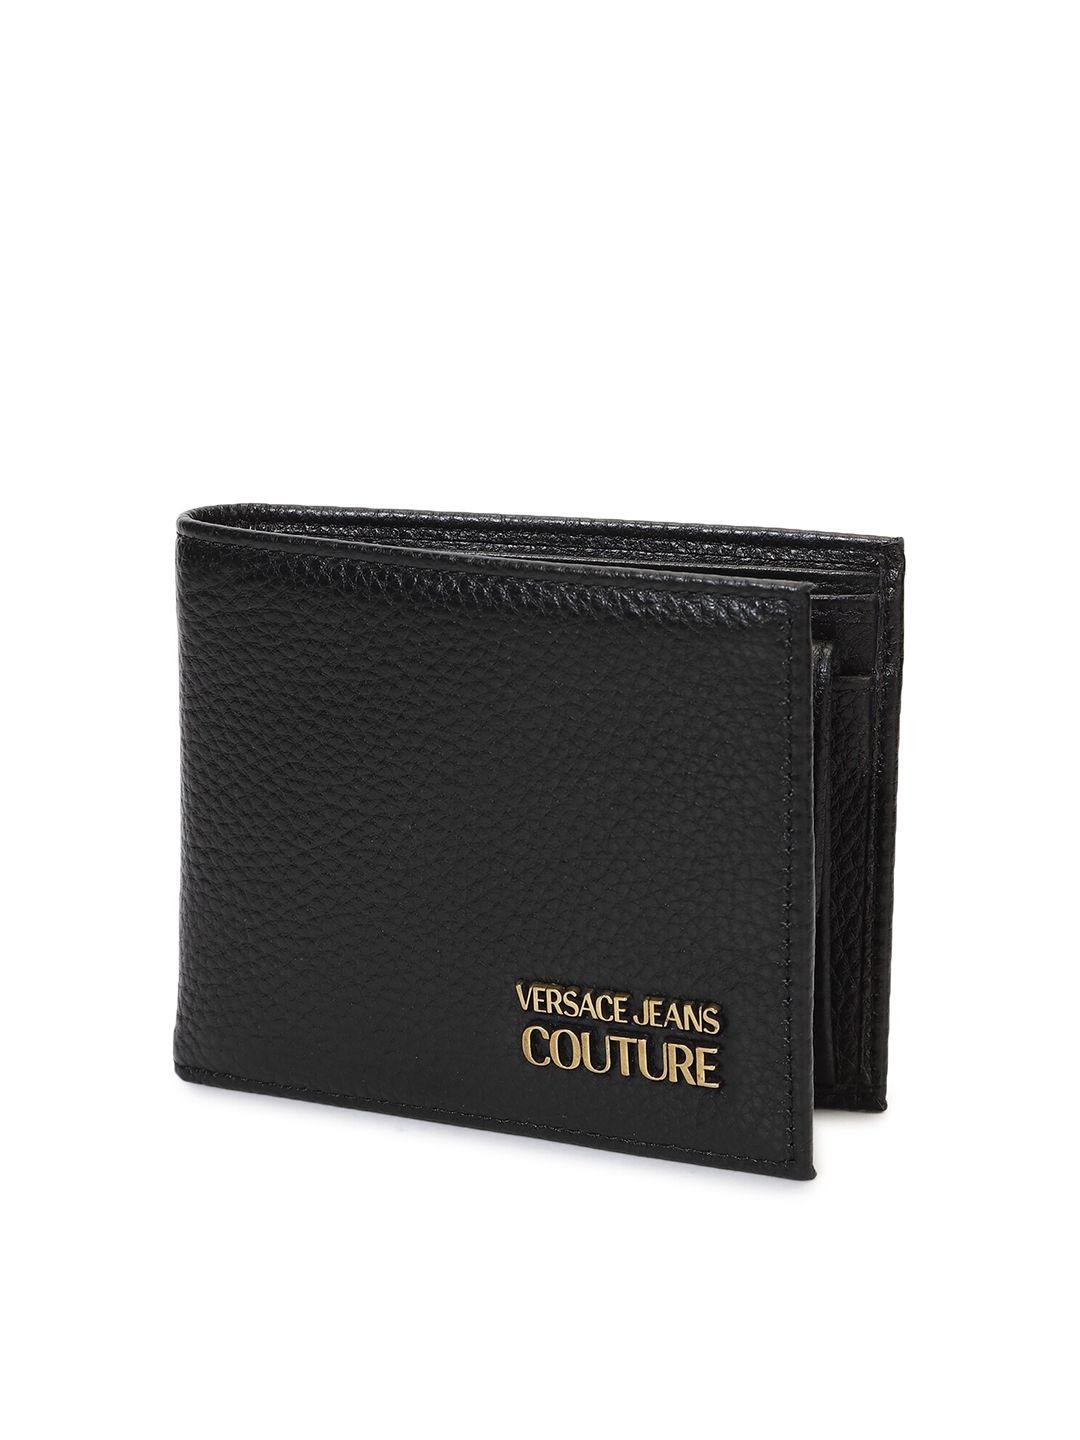 versace jeans couture men black & gold-toned textured leather two fold wallet